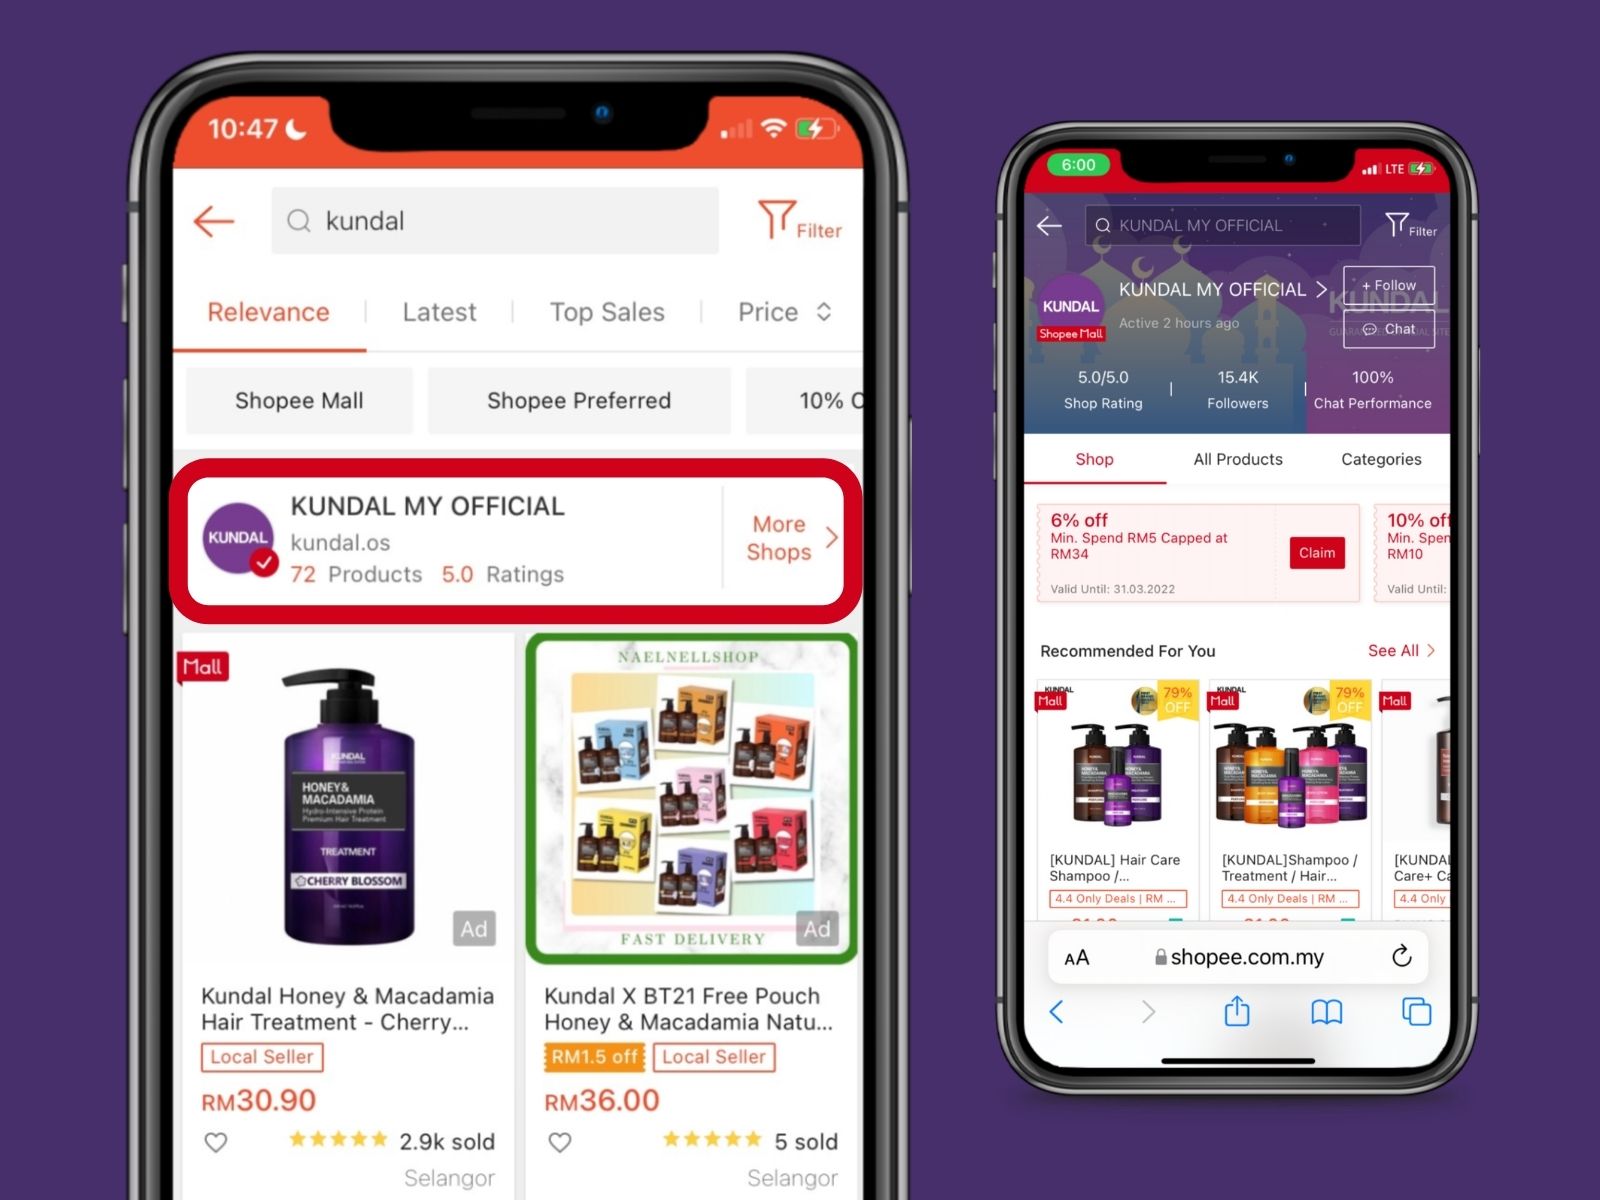 How to Get Started on Shopee Shop Search Ads Featuring Kundal | Digital 38